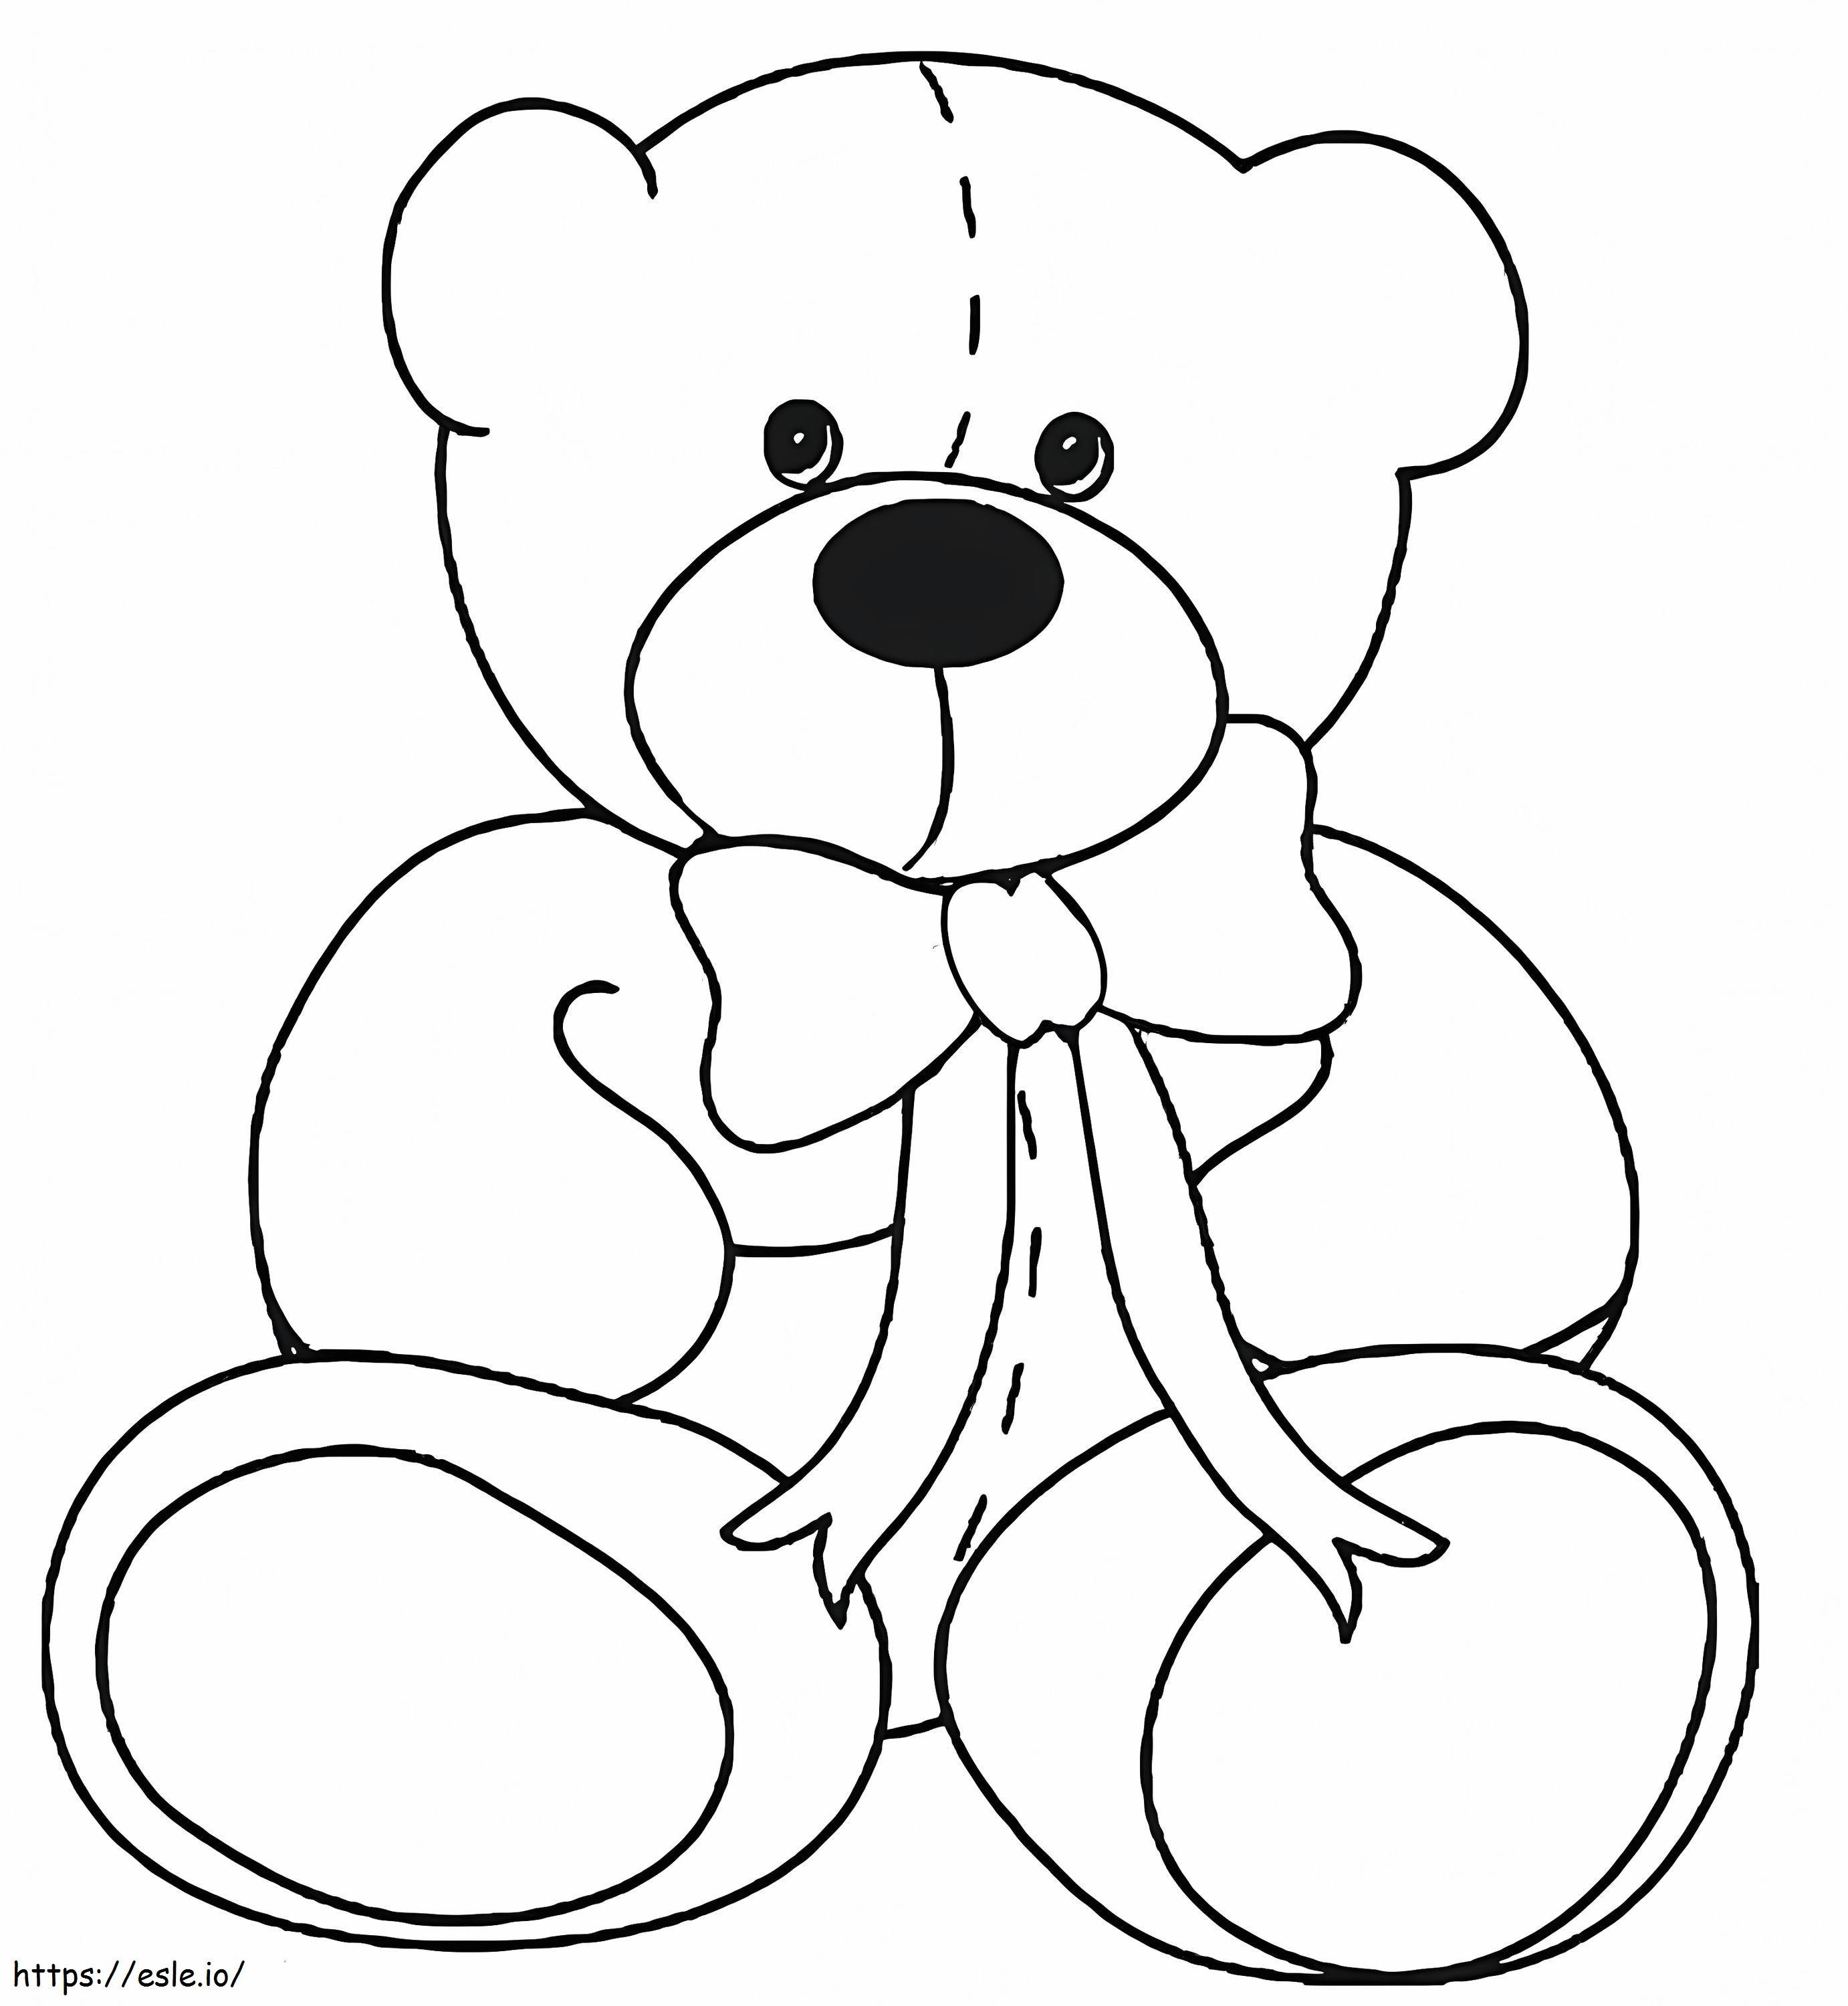 Teddy Bear With Bow coloring page